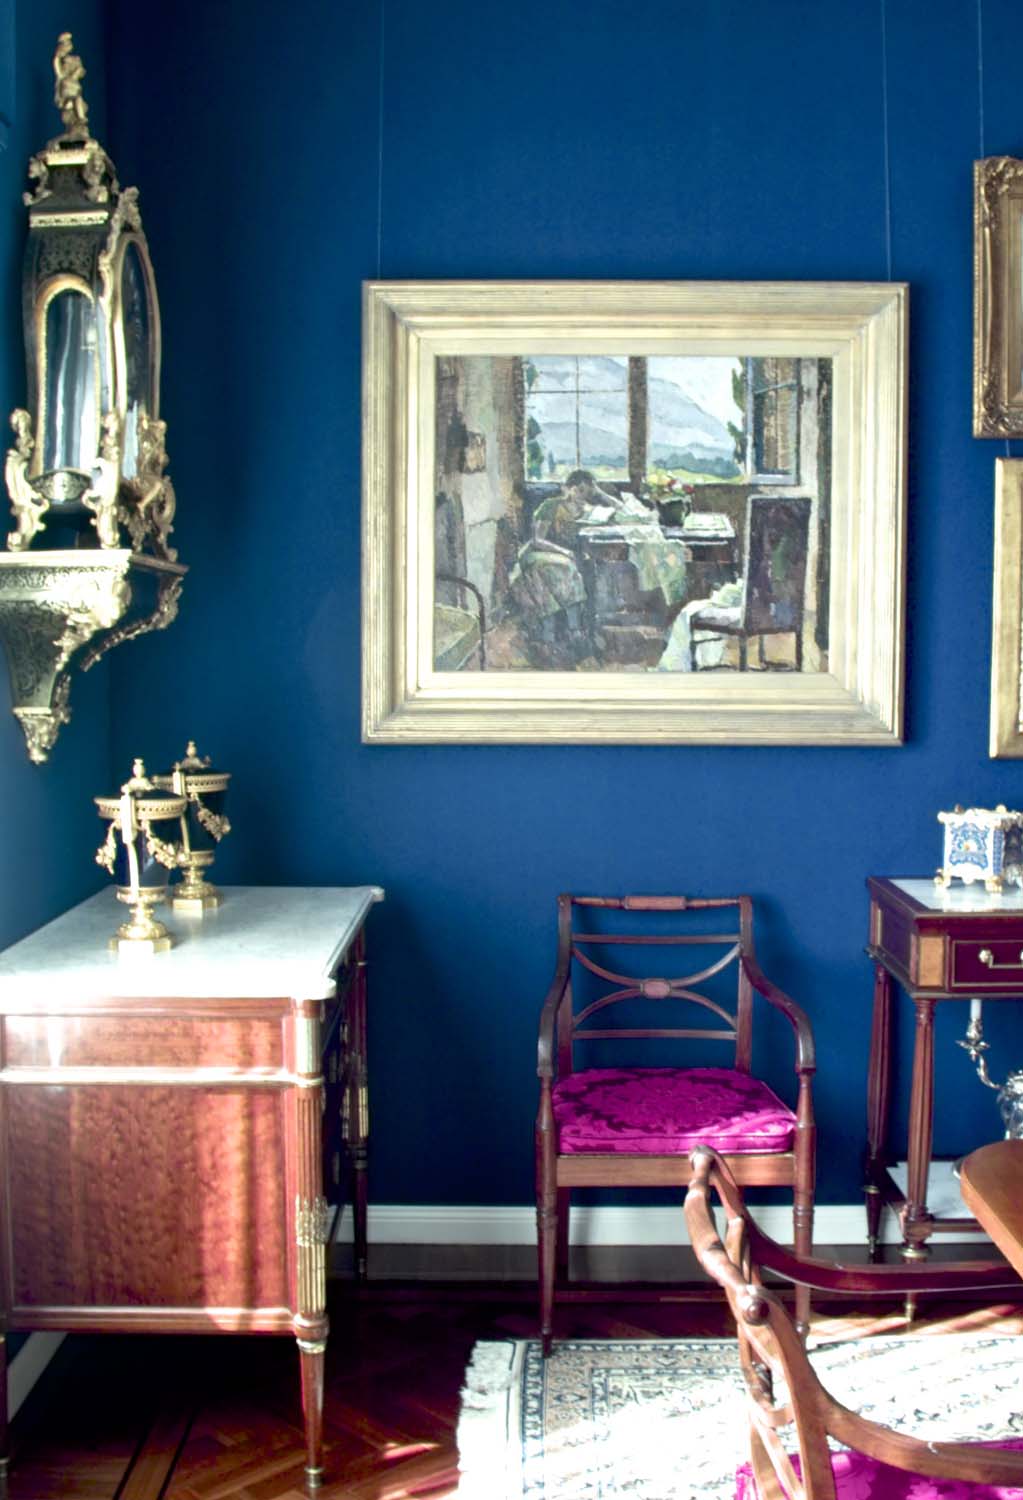 5 Classic fromal French mansion interior design